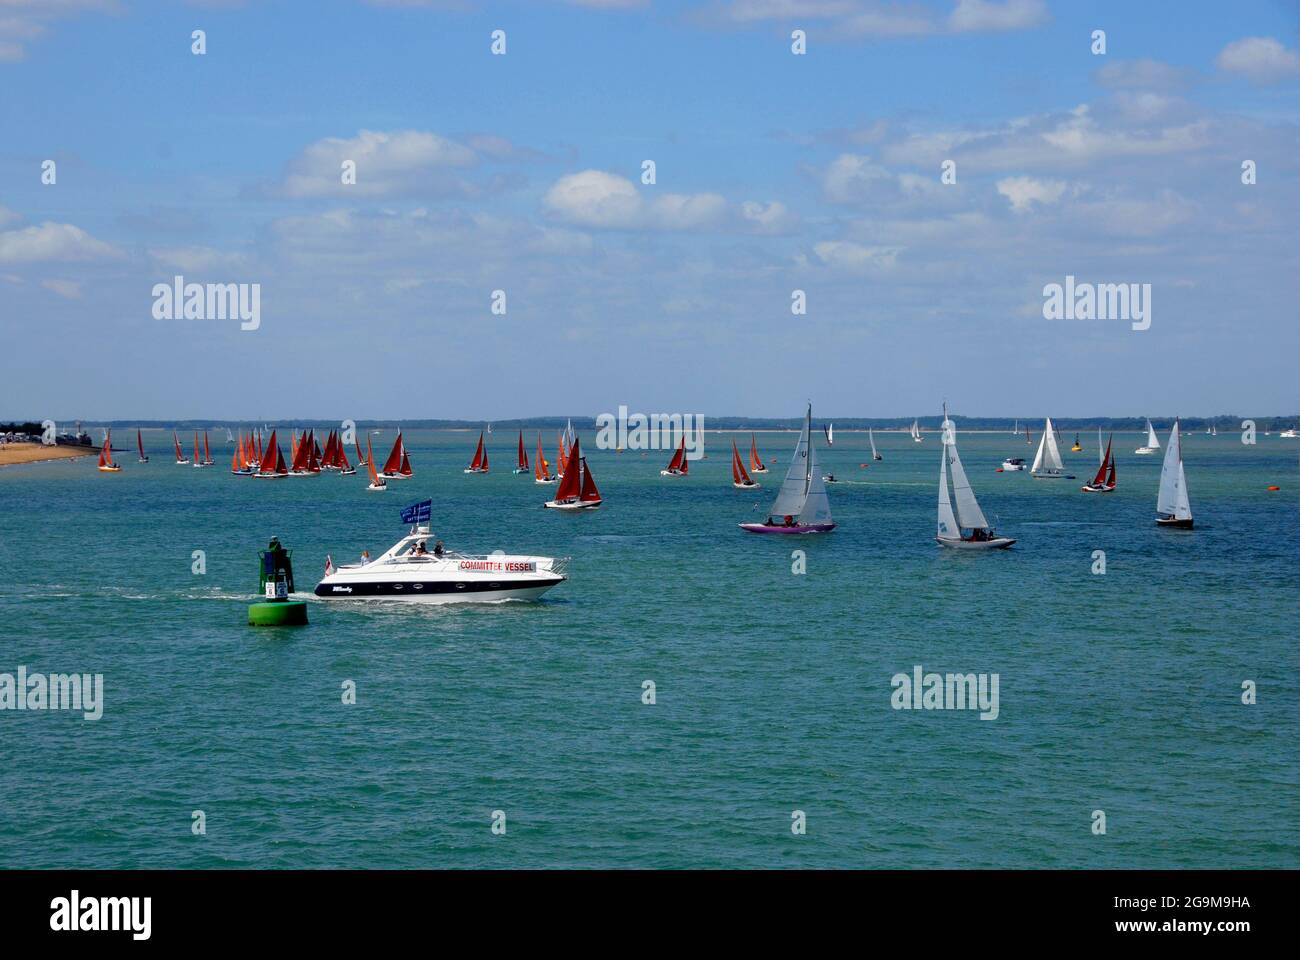 Committee vessel passing by many small yachts in the Solent during Cowes Week regatta Stock Photo